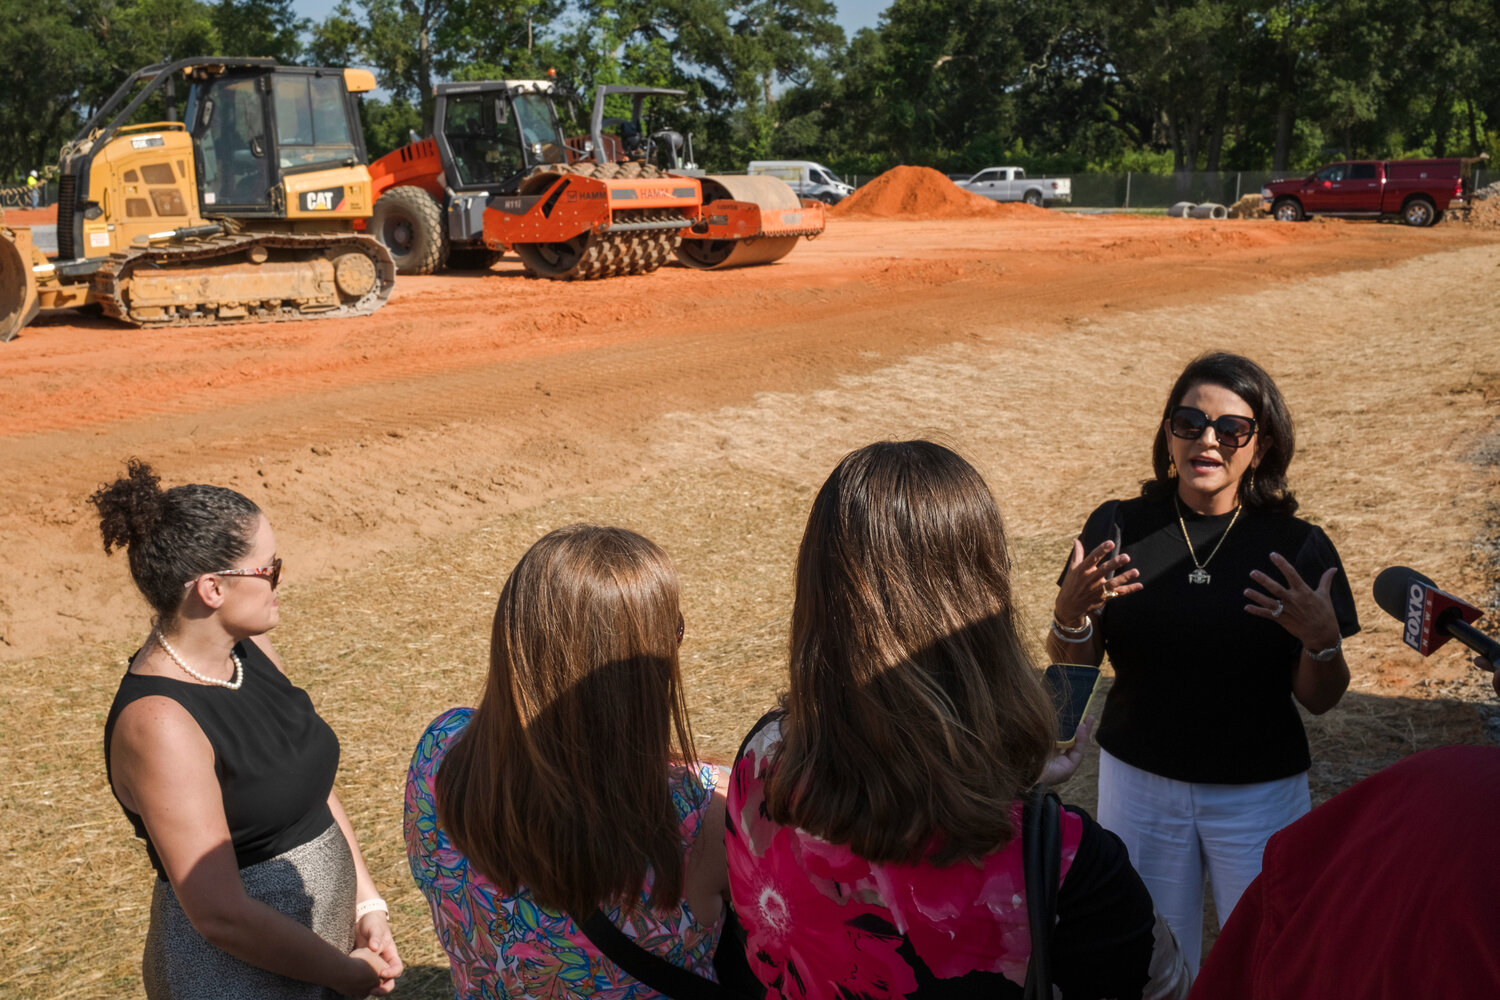 Stephanie Bryan, chairman and CEO of the Poarch Band of Creek Indians, speaks to reporters following the ground breaking for the International Residence Hall on Tuesday.